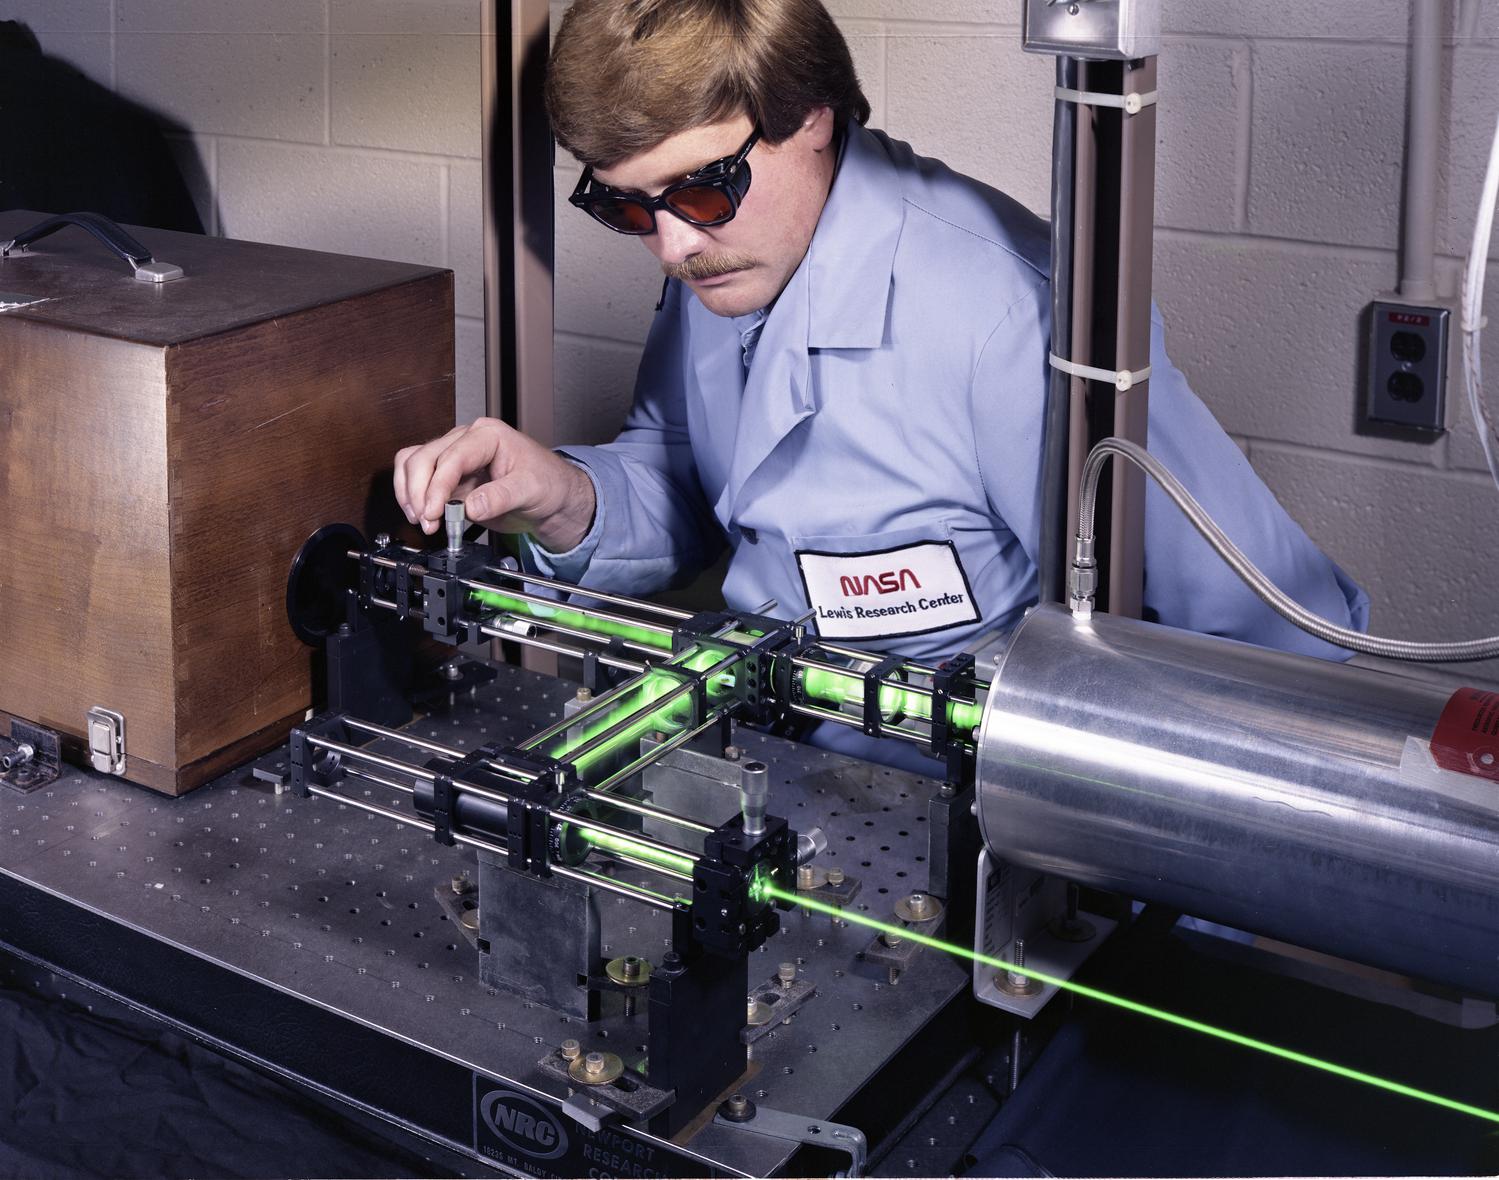 Researcher with protective glasses looks at laser emission through series of small pipes.